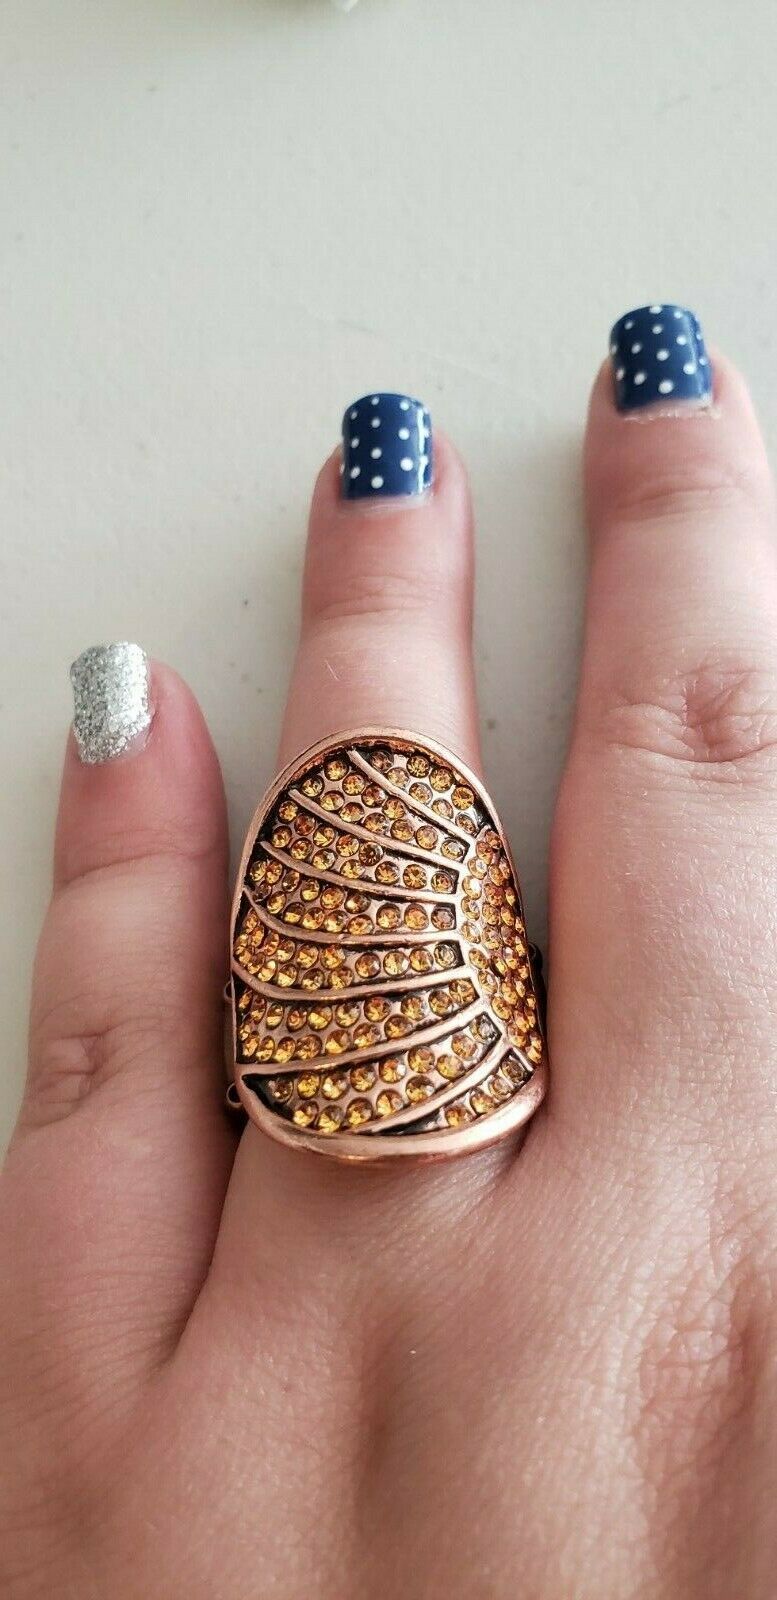 Primary image for Paparazzi Ring (one size fits most) (new) DAZZLE DAZE COPPER